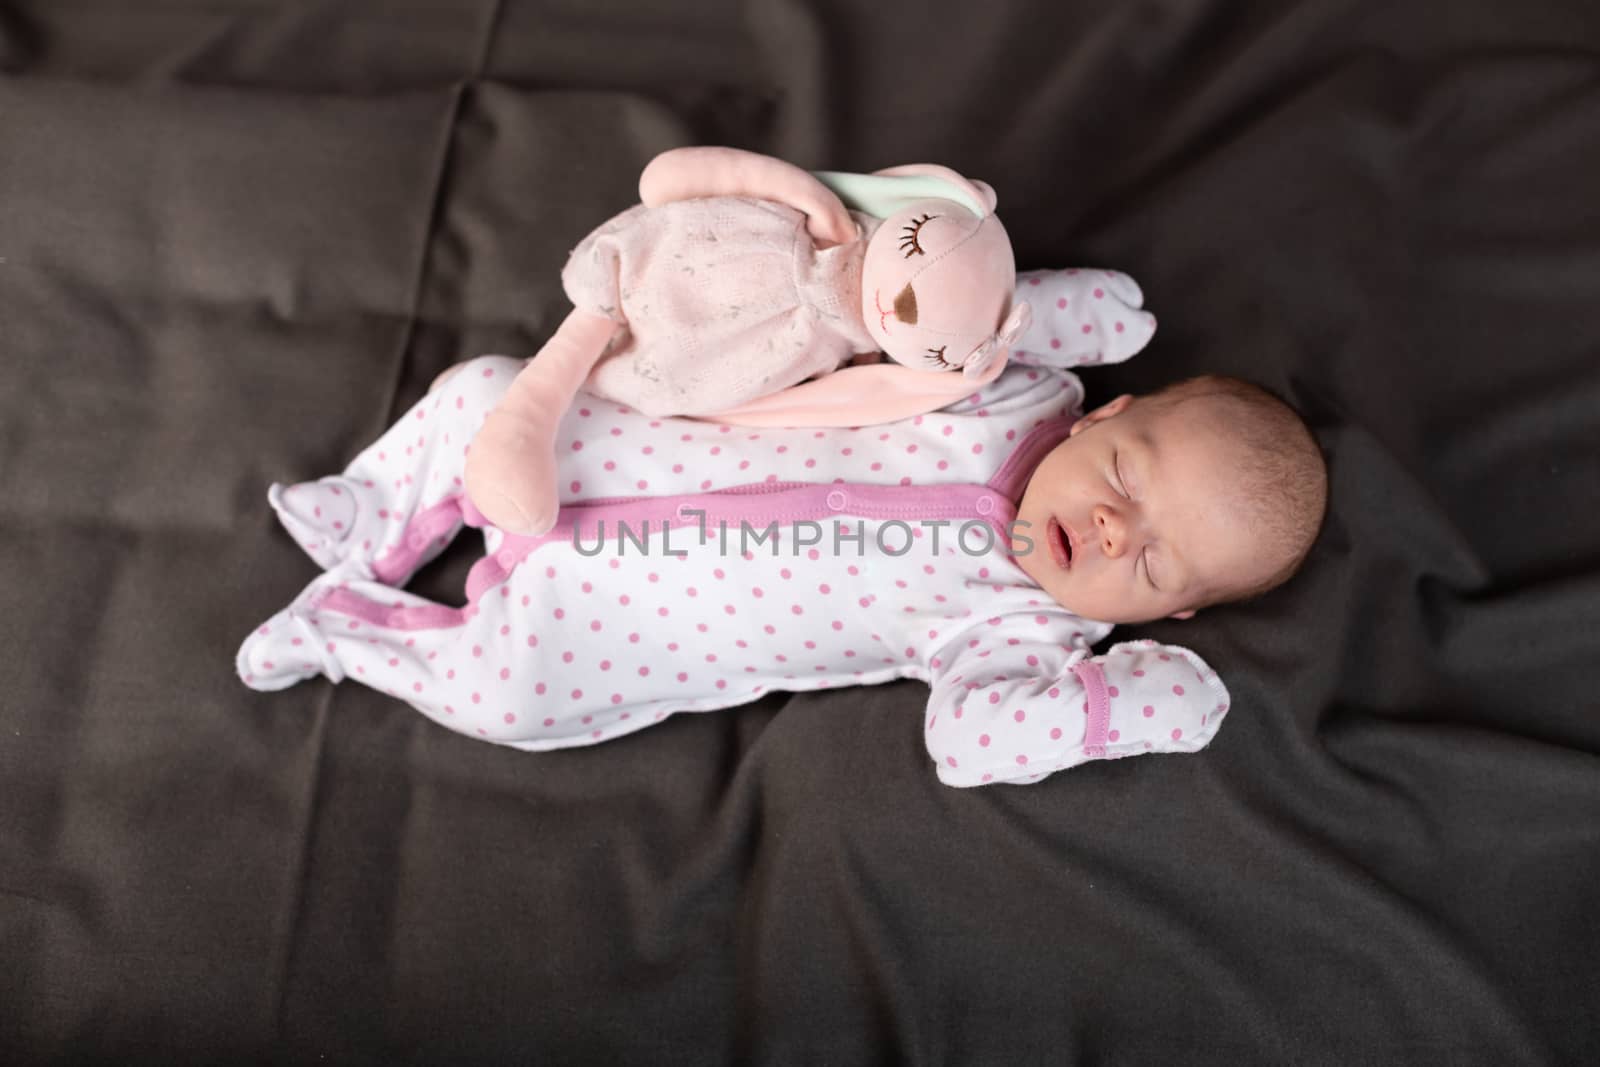 pretty smiling baby girl and toy rabbit lying in darck background.